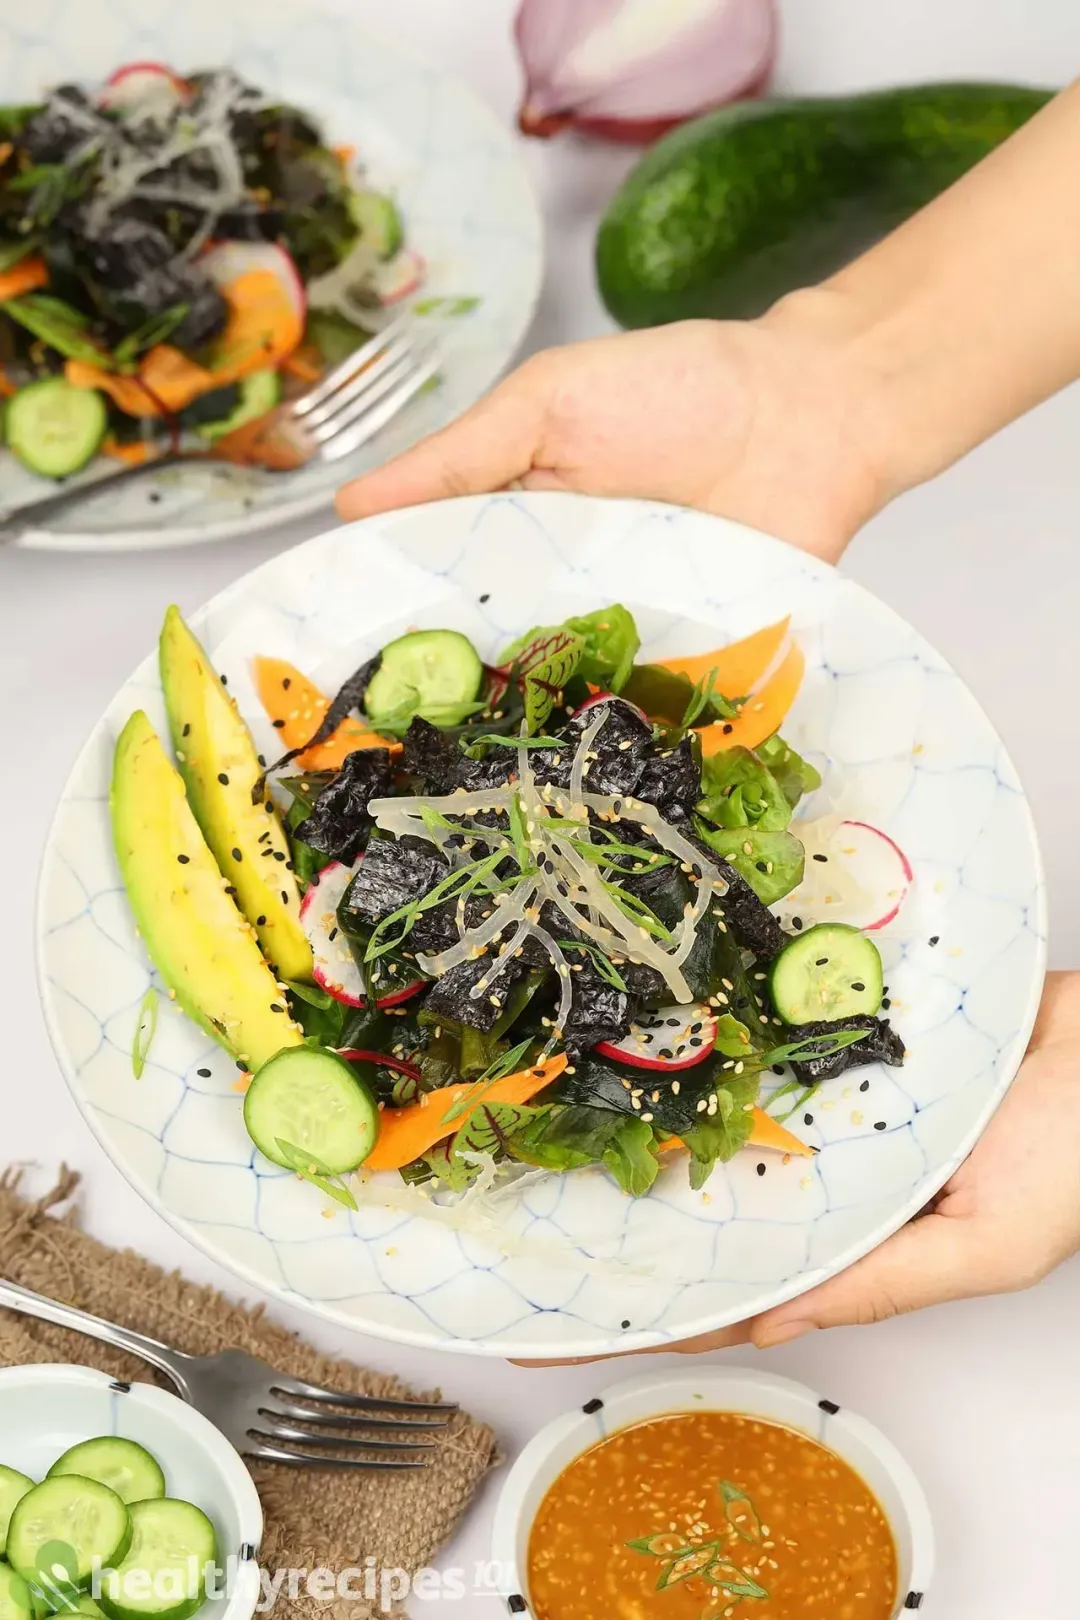 How to Store Seaweed Salad